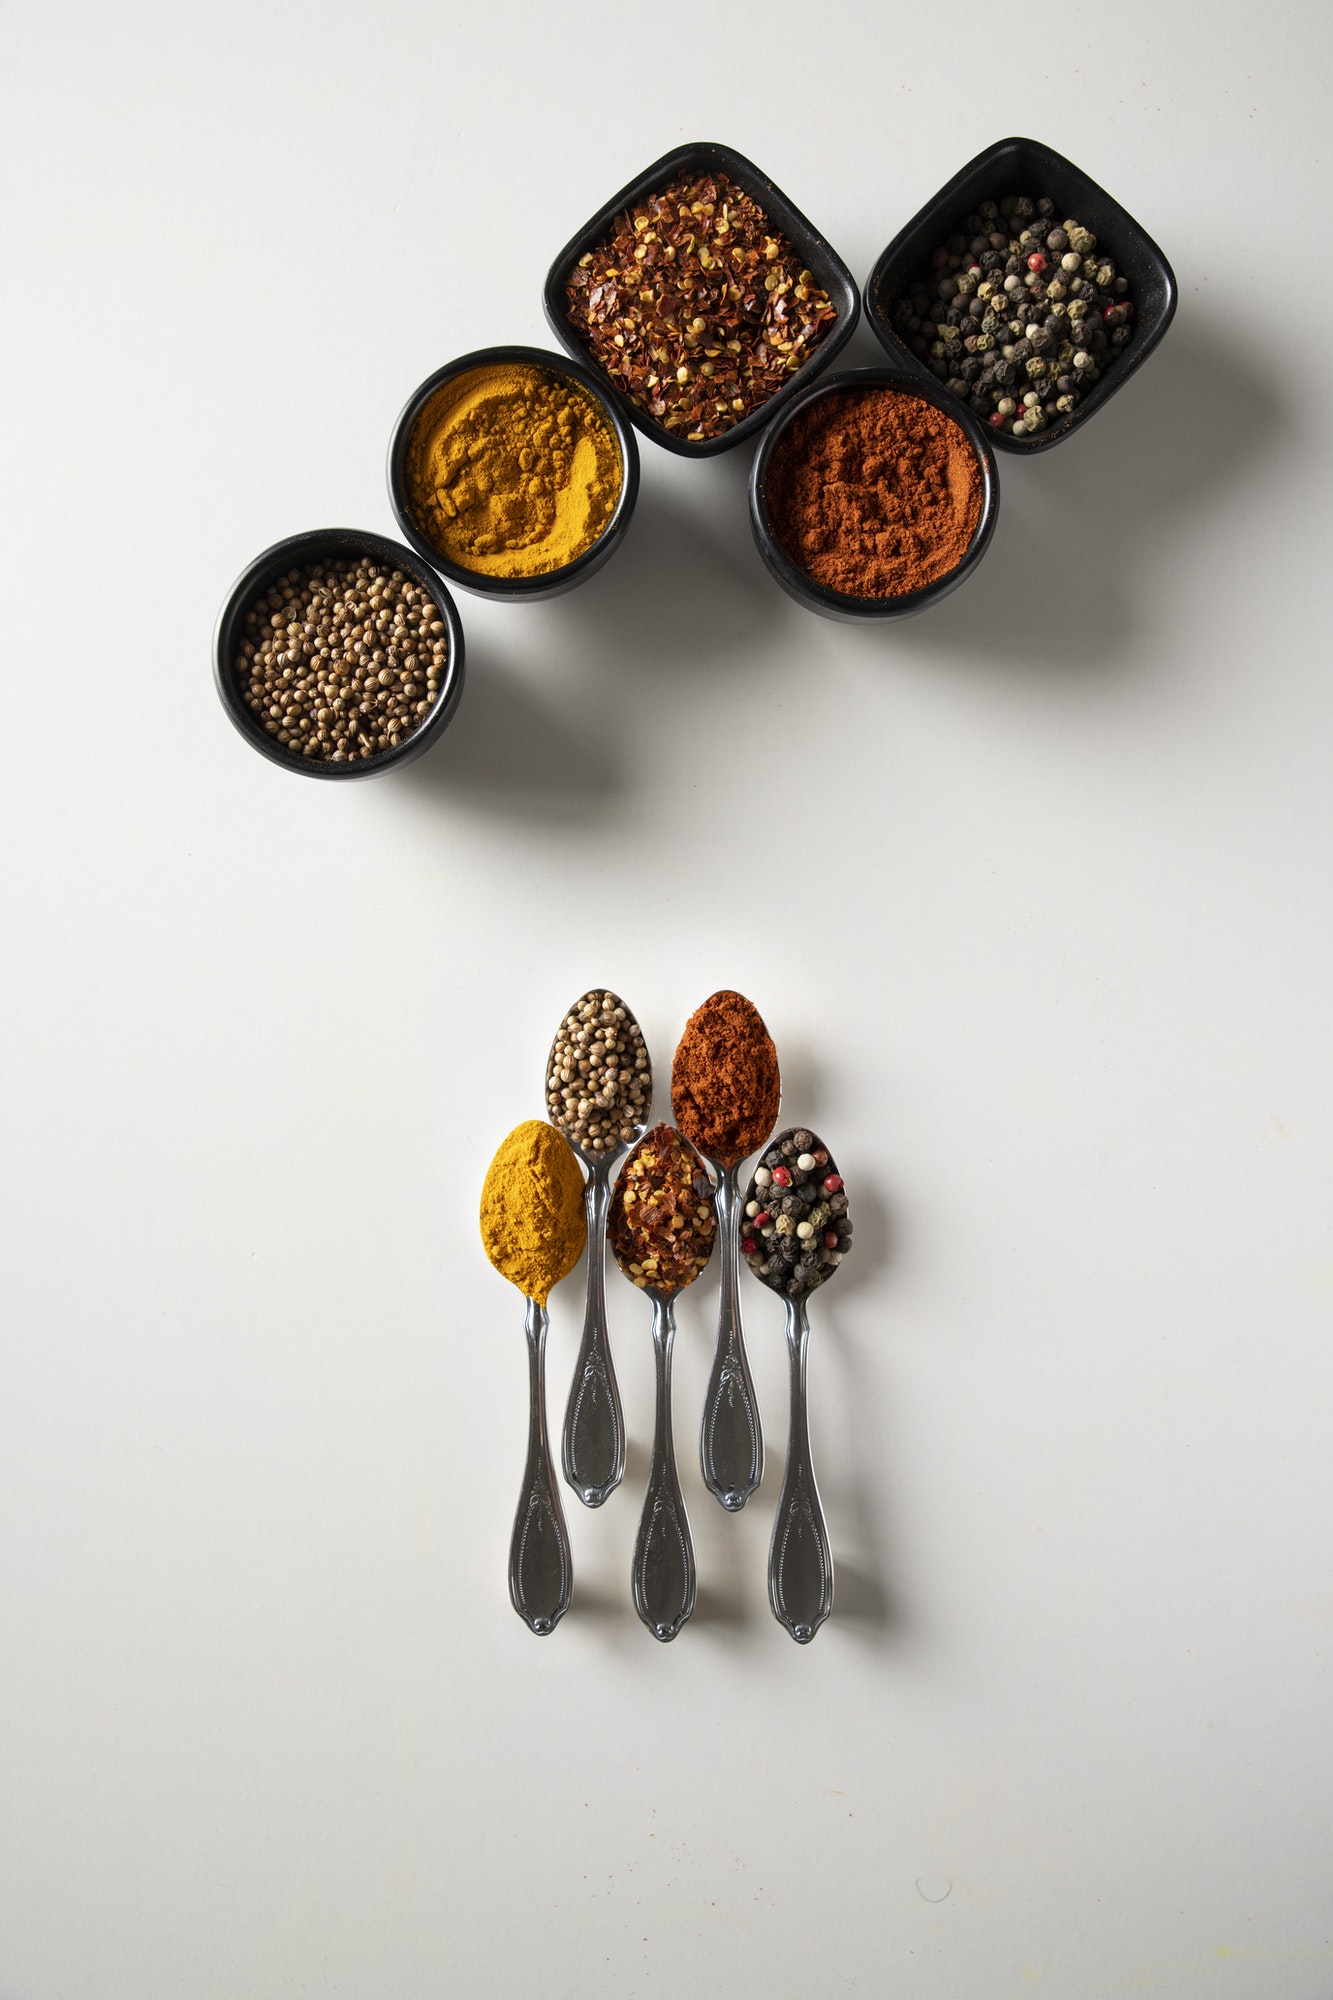 Five Spoons with spices and small bowls with spices